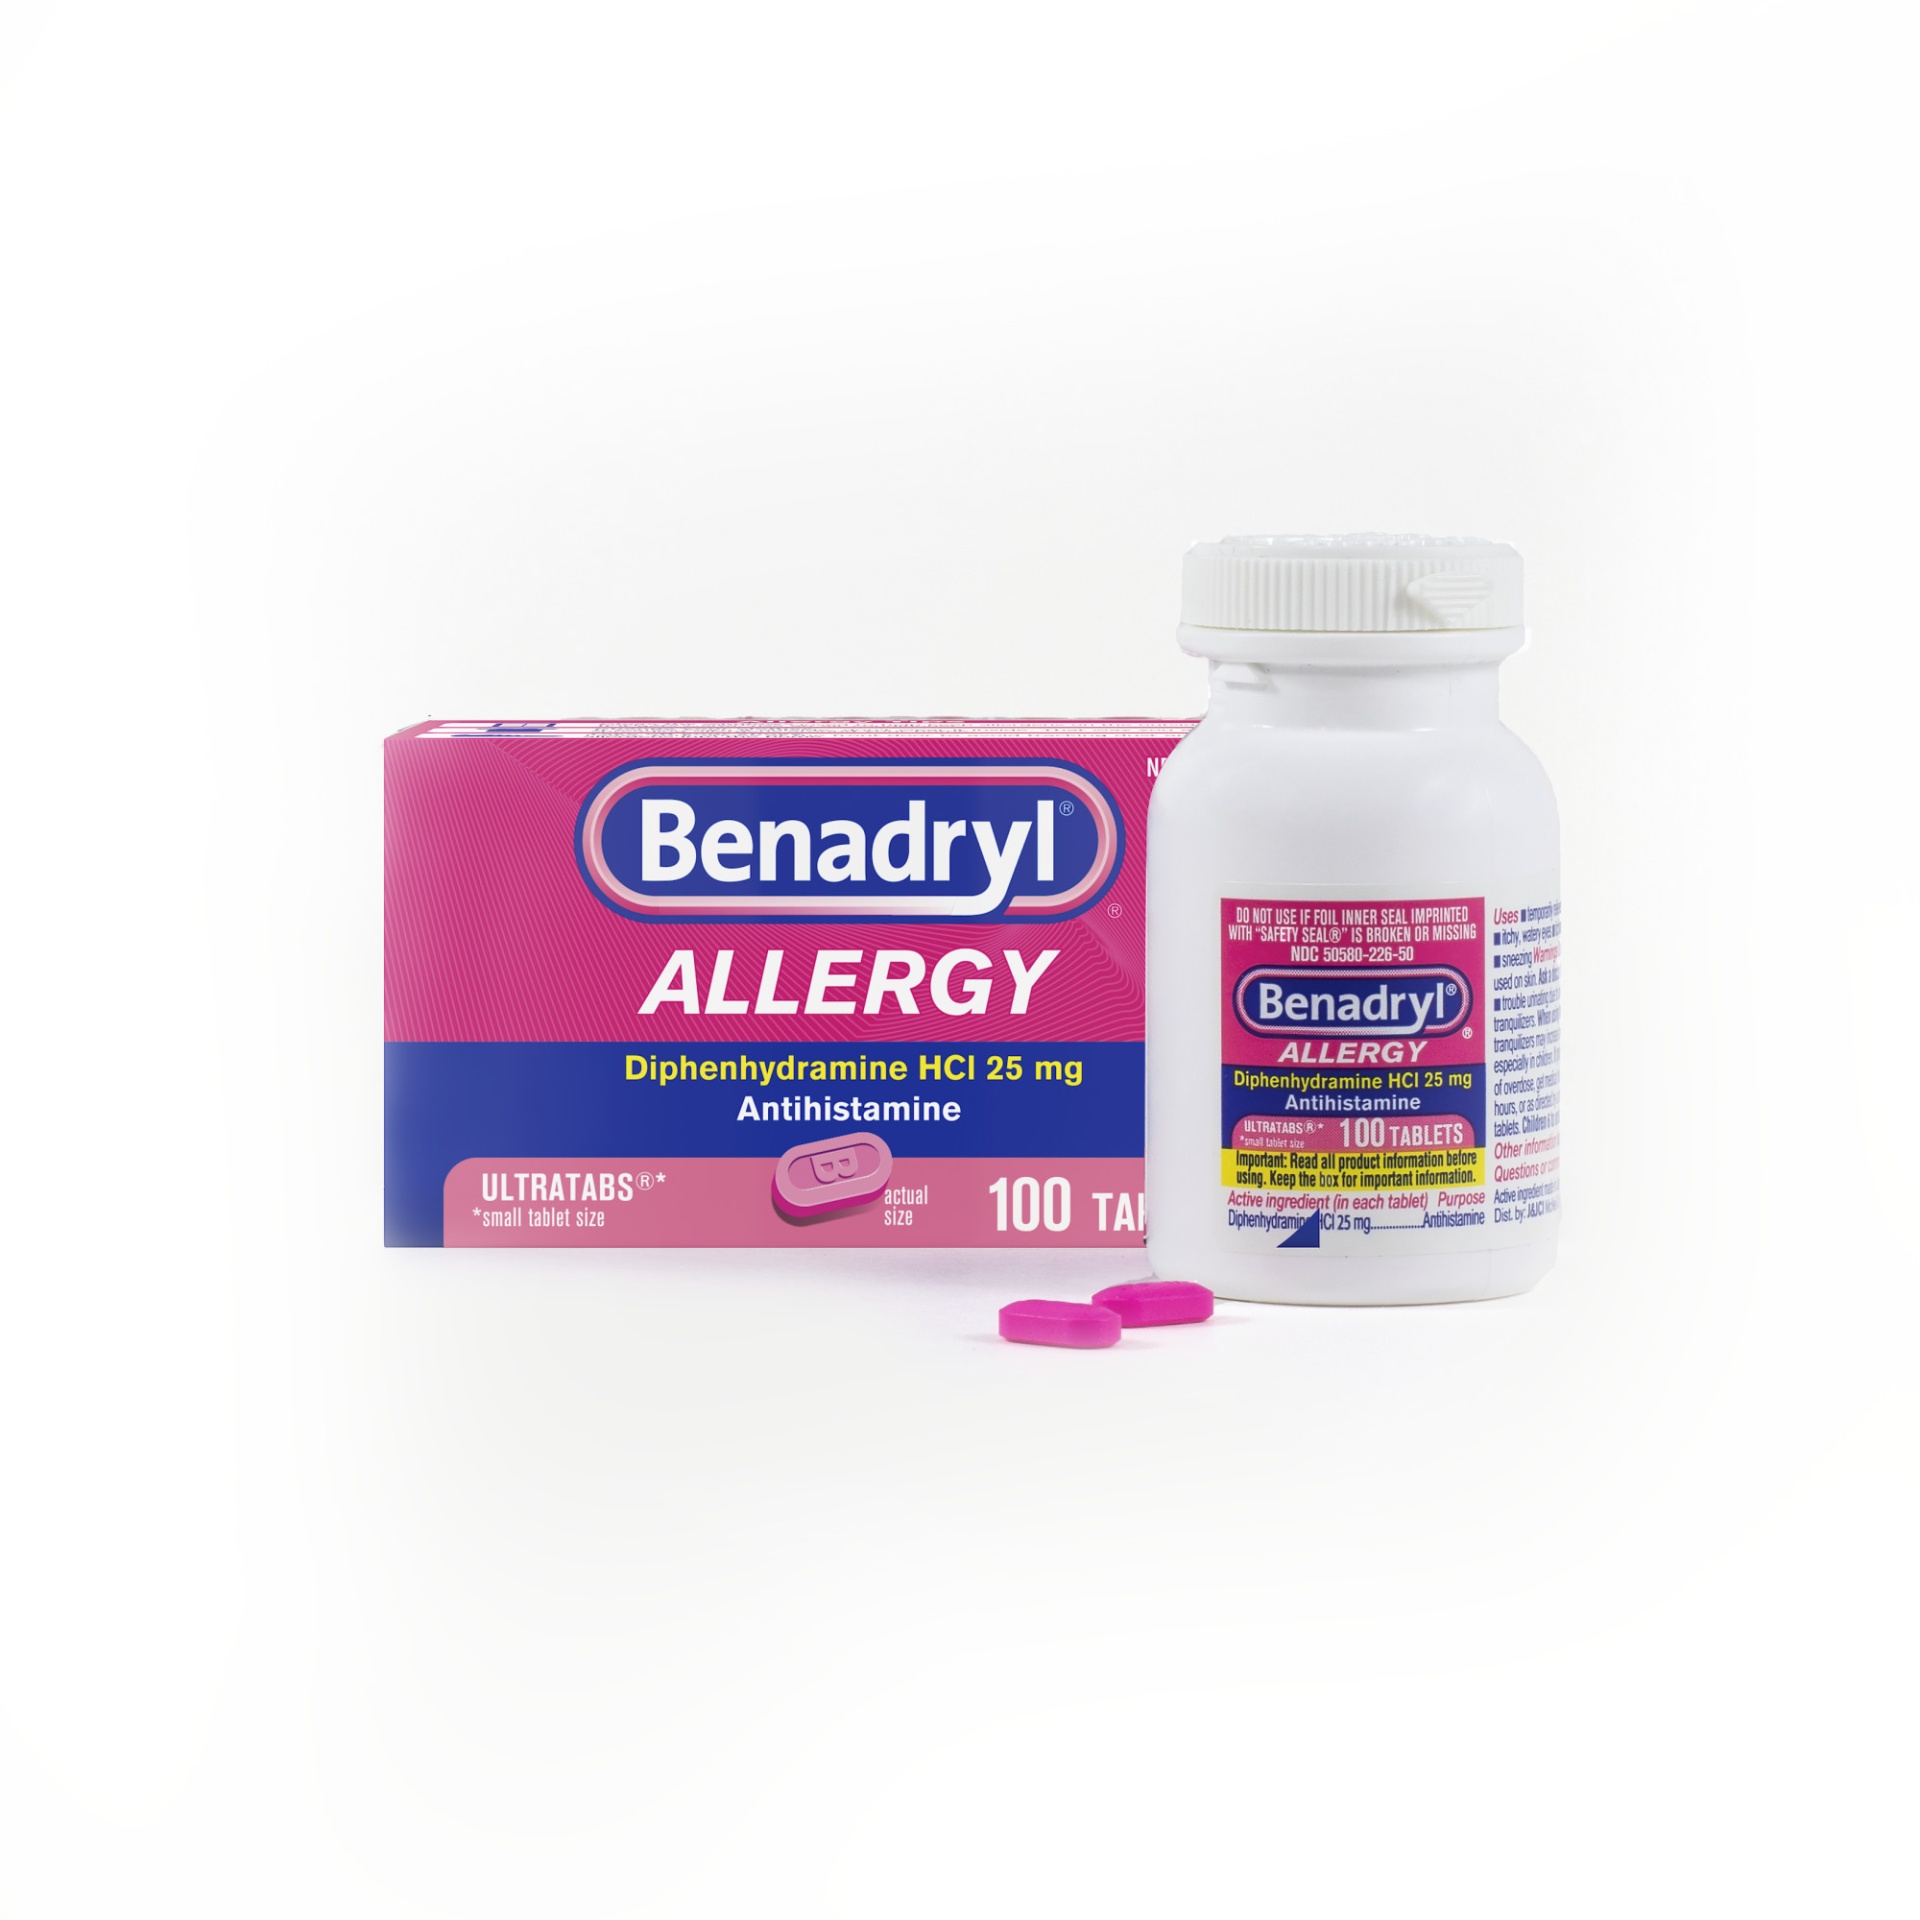 slide 1 of 5, Benadryl Ultratabs Antihistamine Allergy Relief Medicine, 25 mg Diphenhydramine HCl Tablets For Relief of Allergy Symptoms Due to Hay Fever, Upper Respiratory Allergies & More, 100 ct; 25 mg